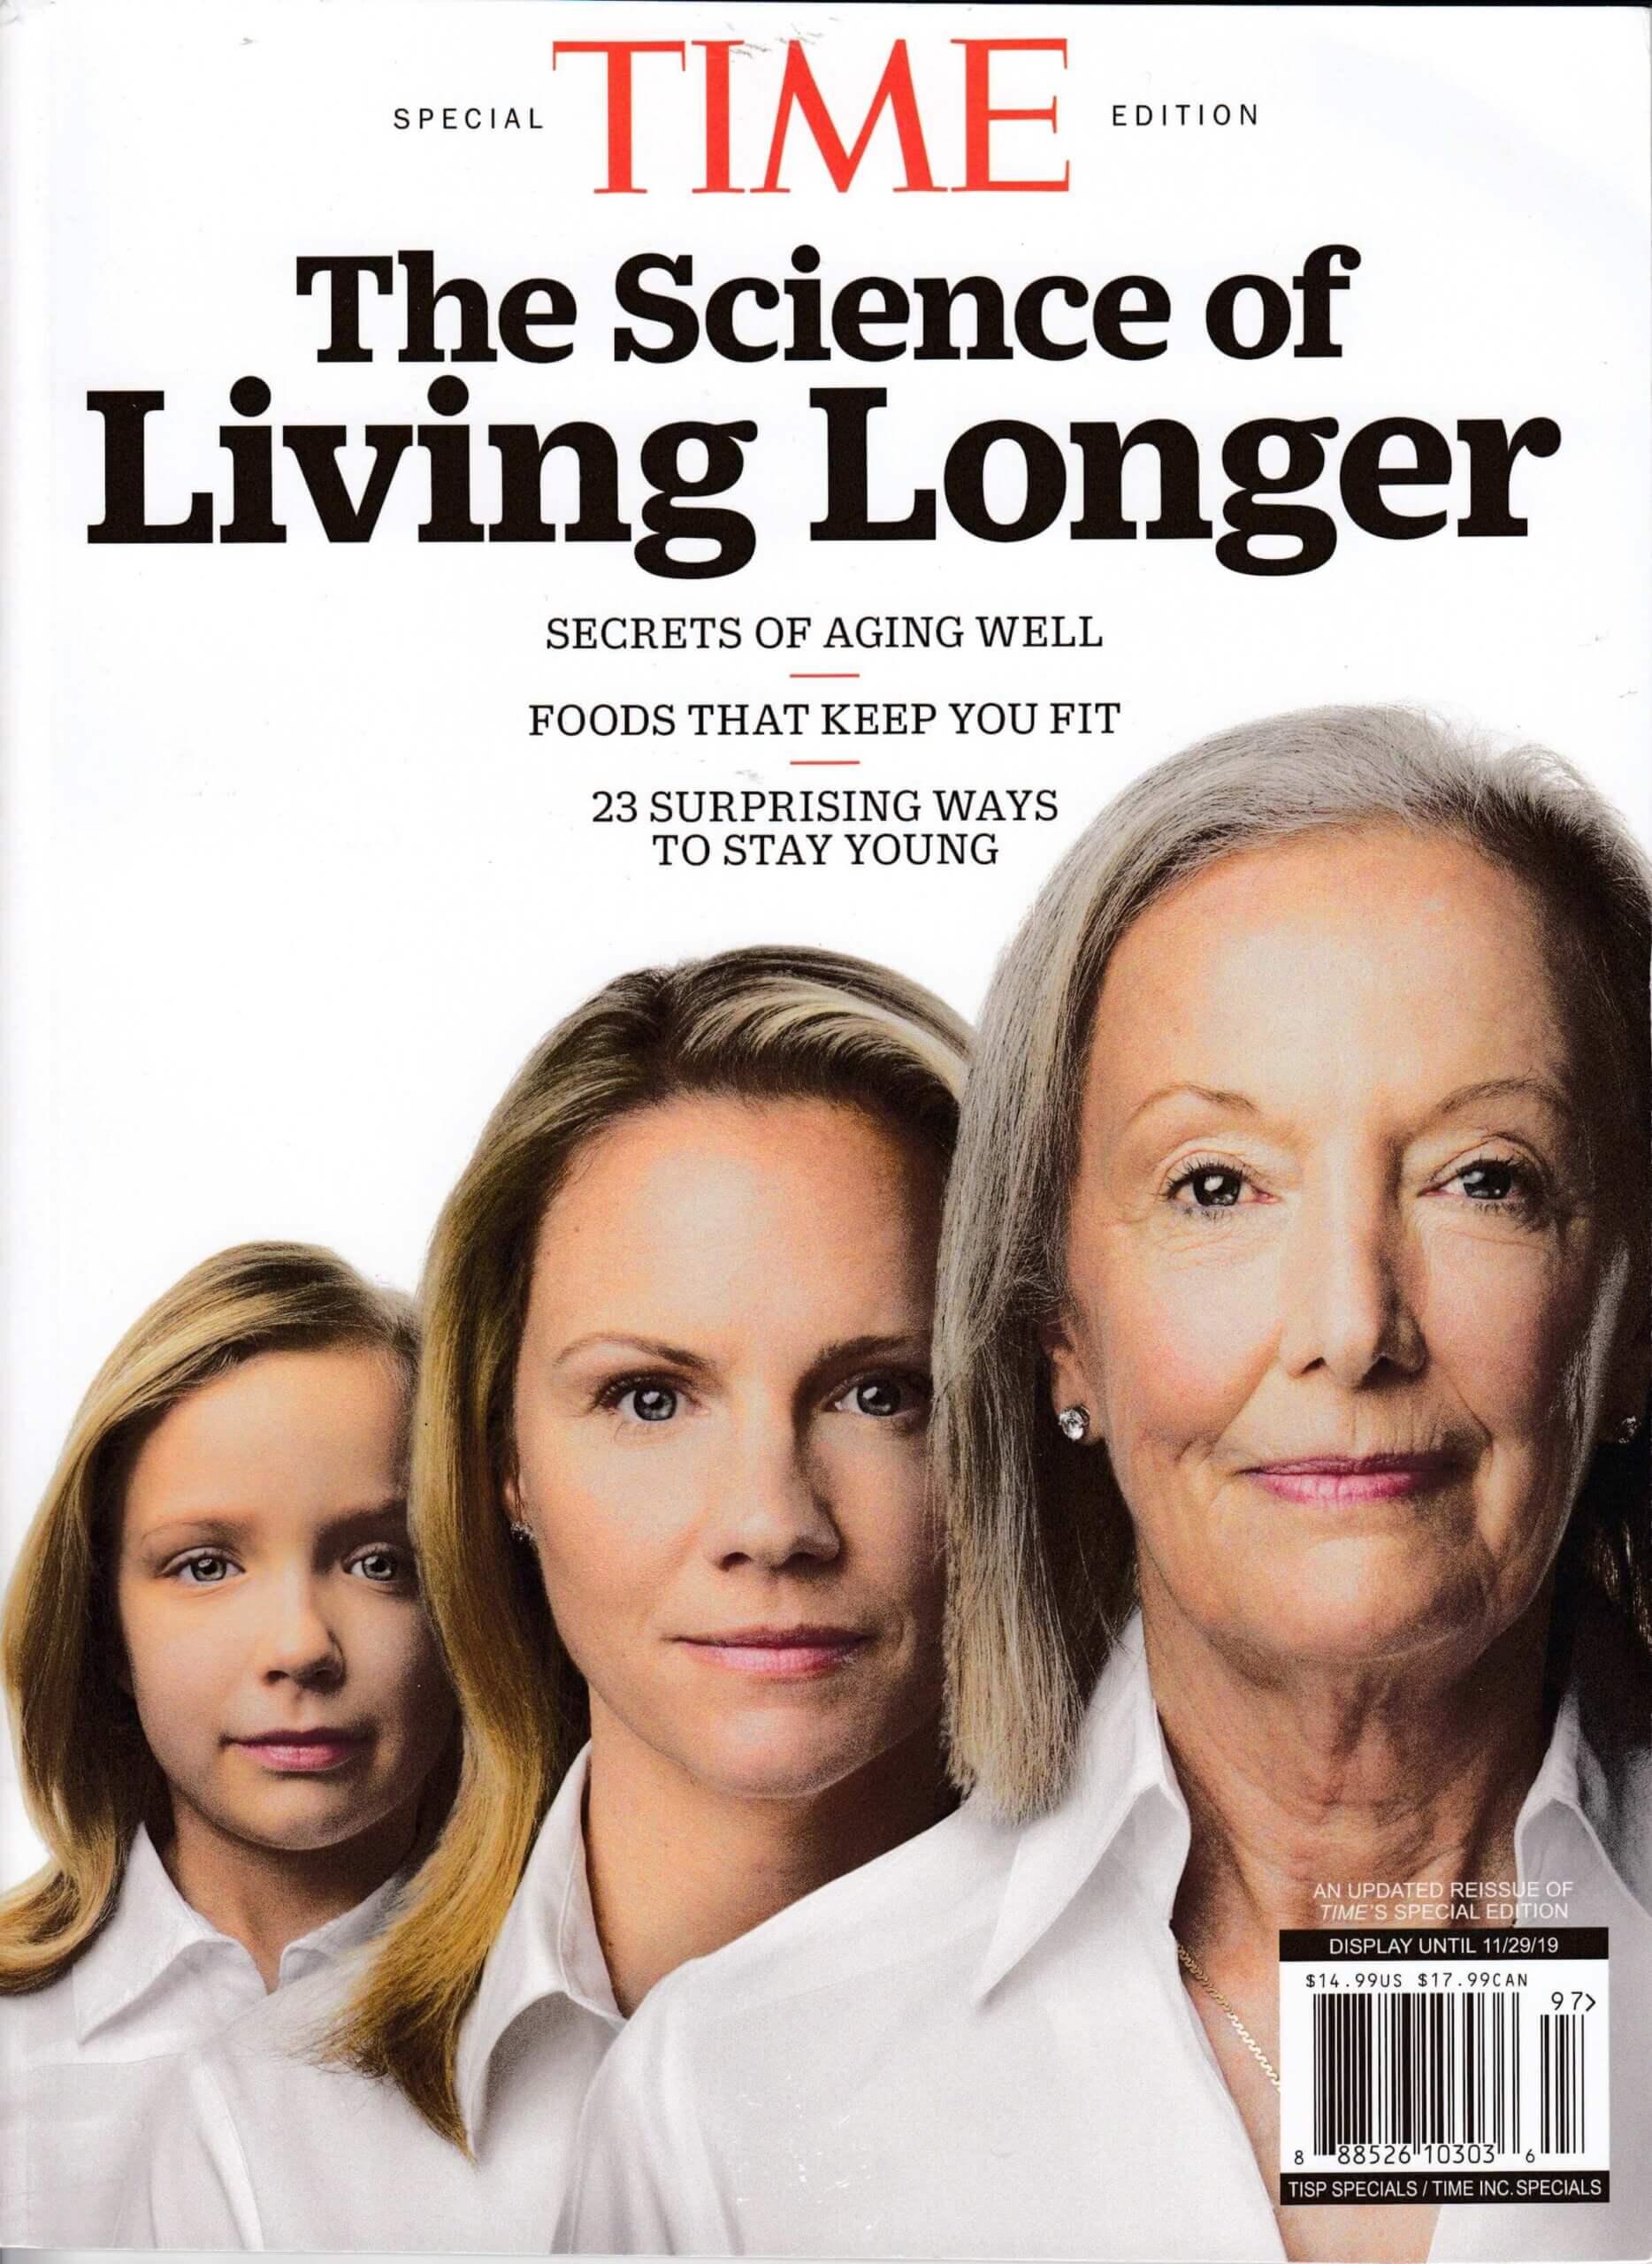 Time Magazine - The Science of Living Longer